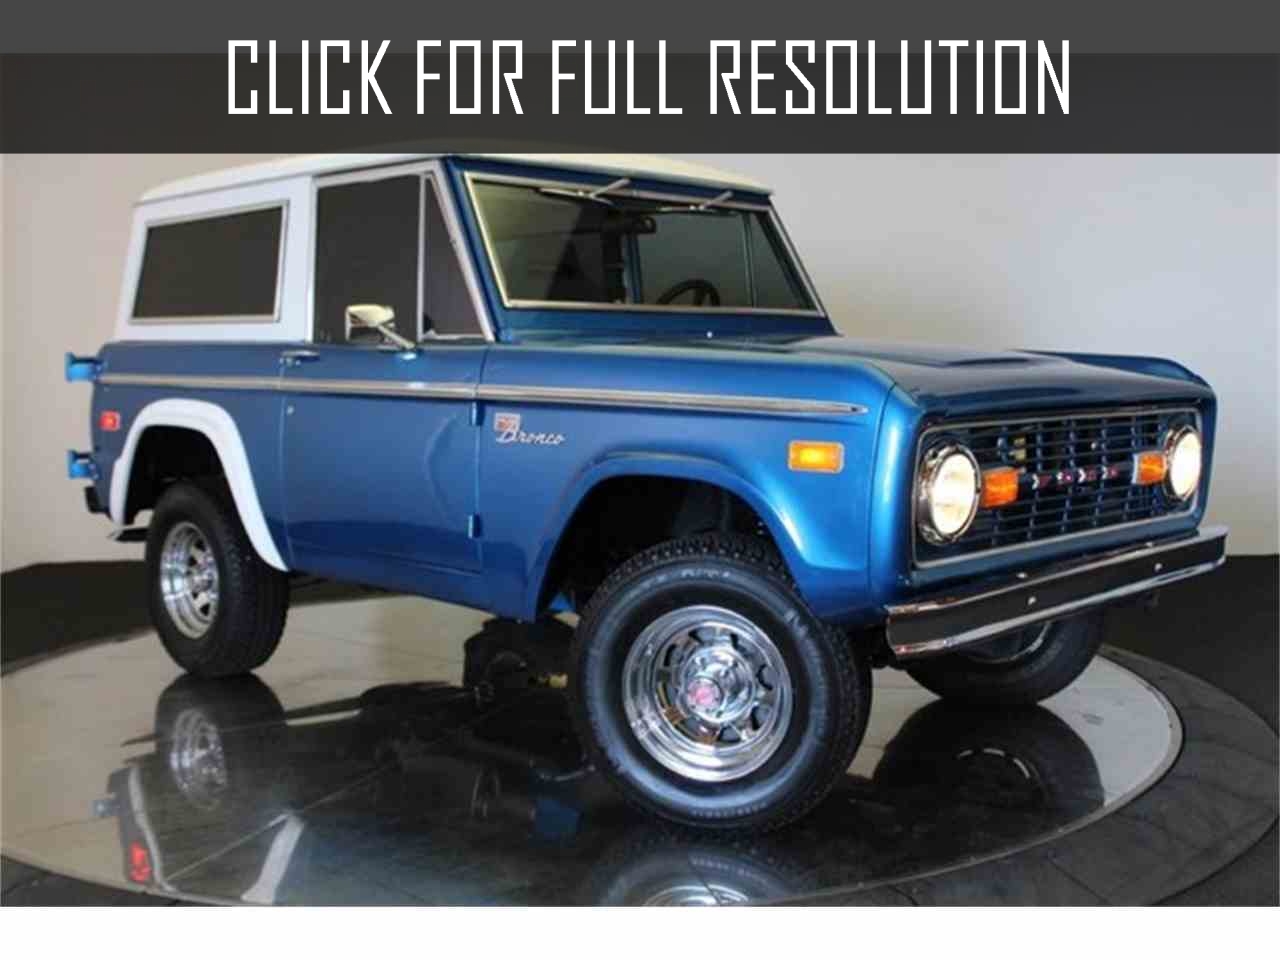 Ford Bronco 1970